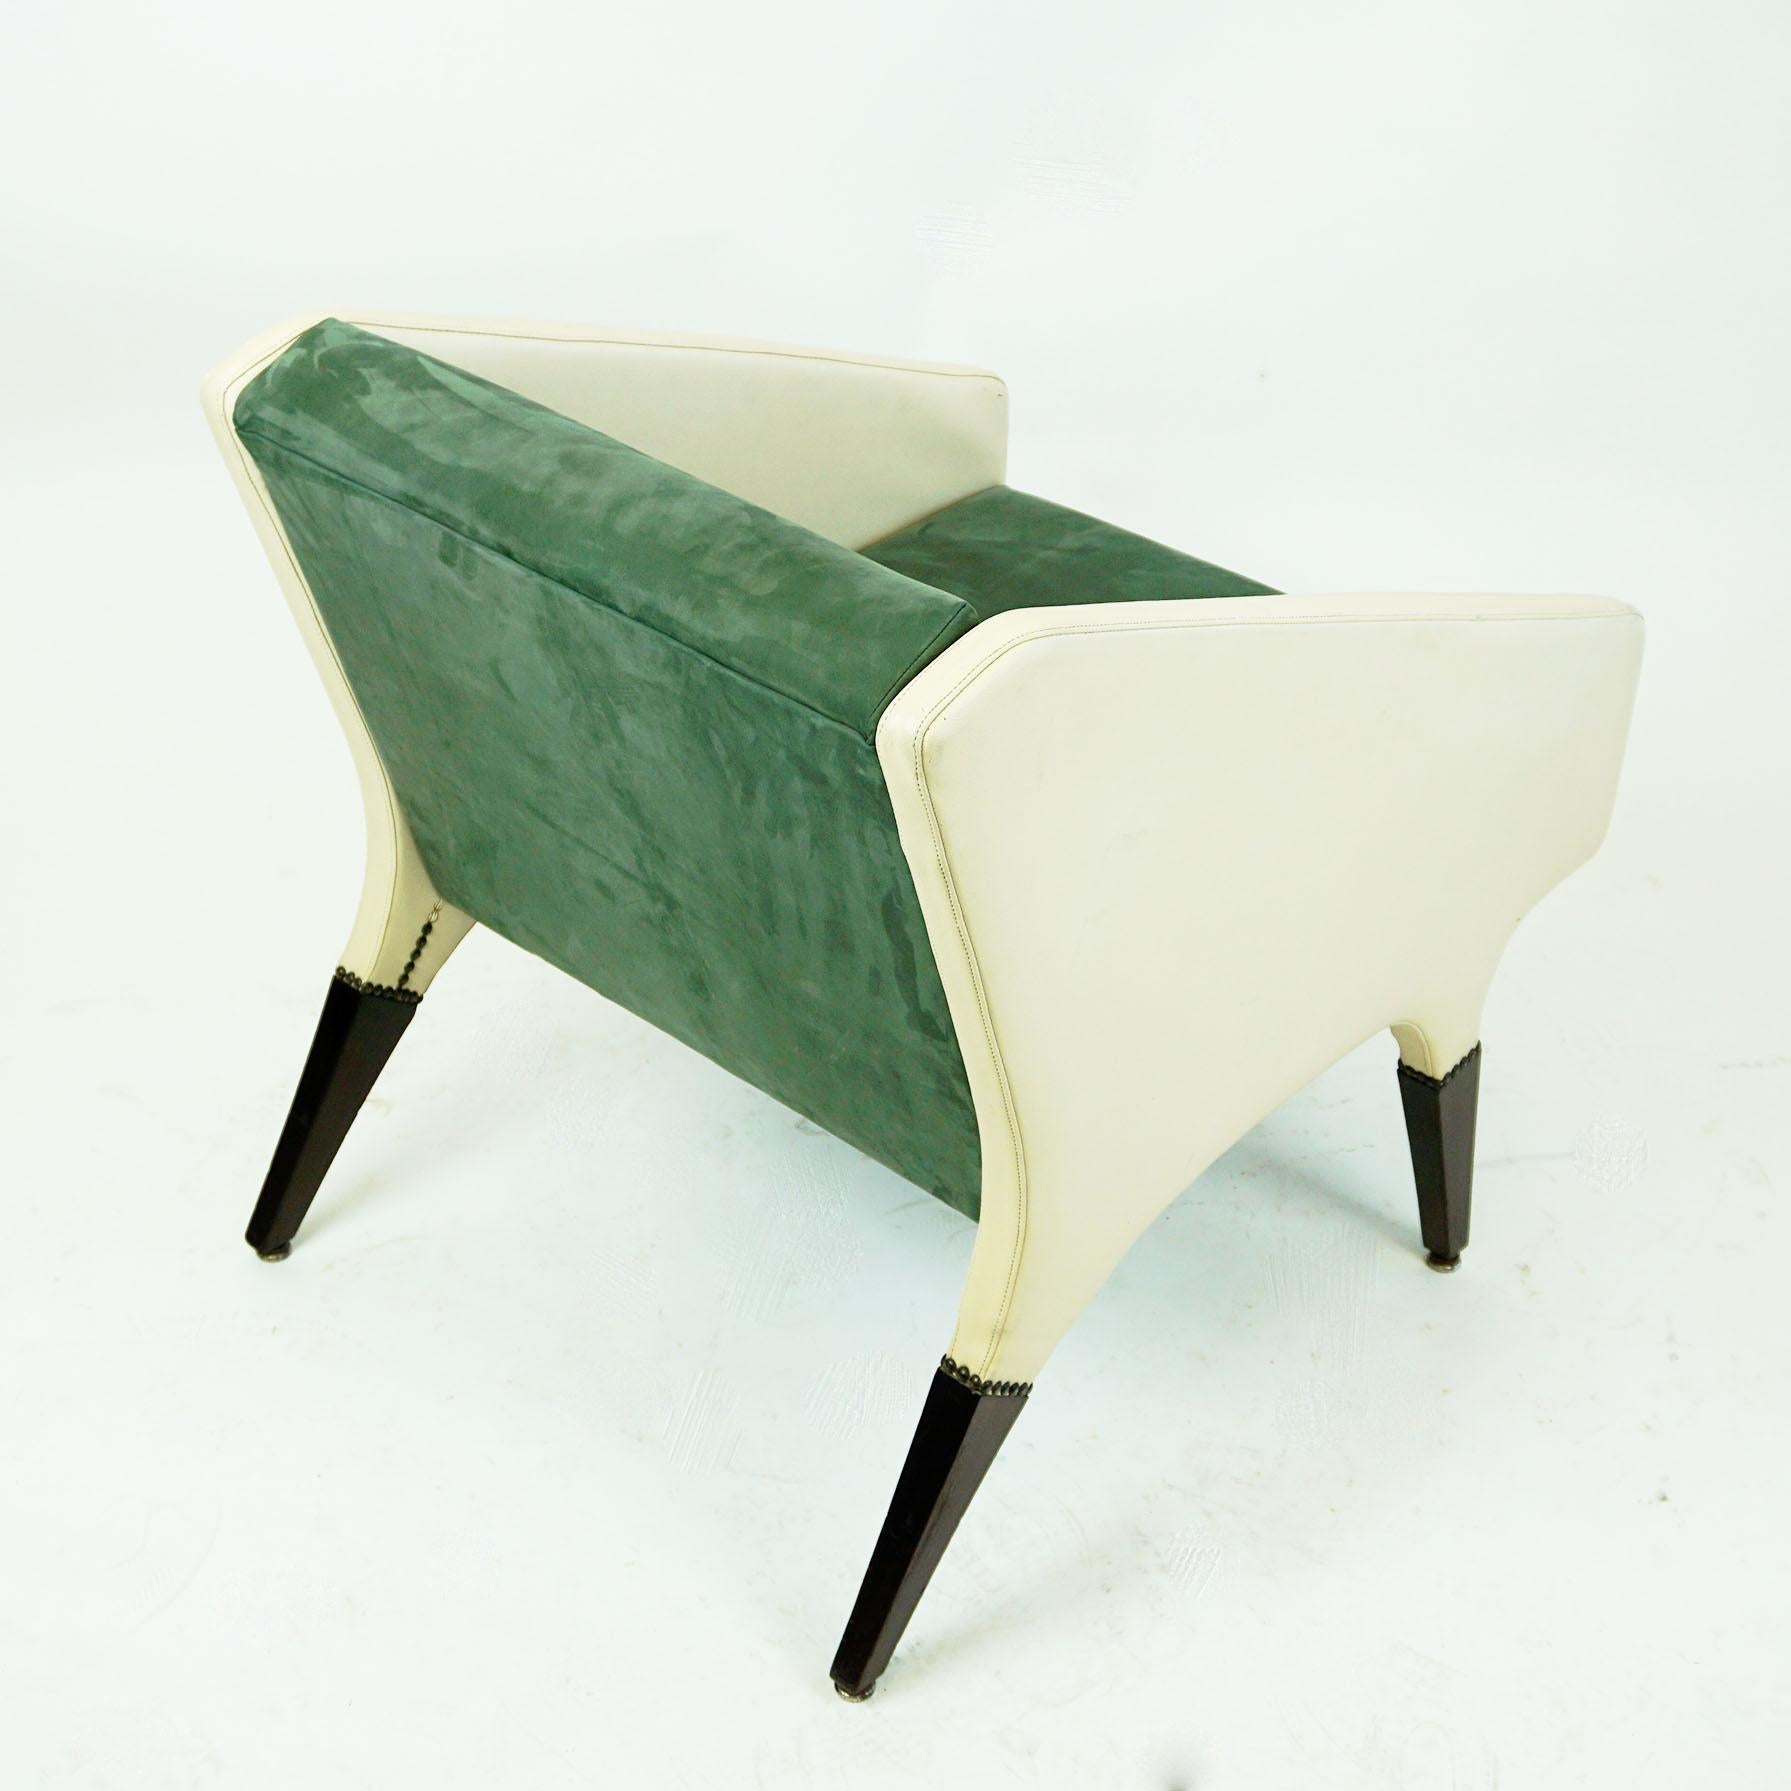 Suede Italian Midcentury Parco dei Principi Lounge Chair by Gio Ponti for Cassina